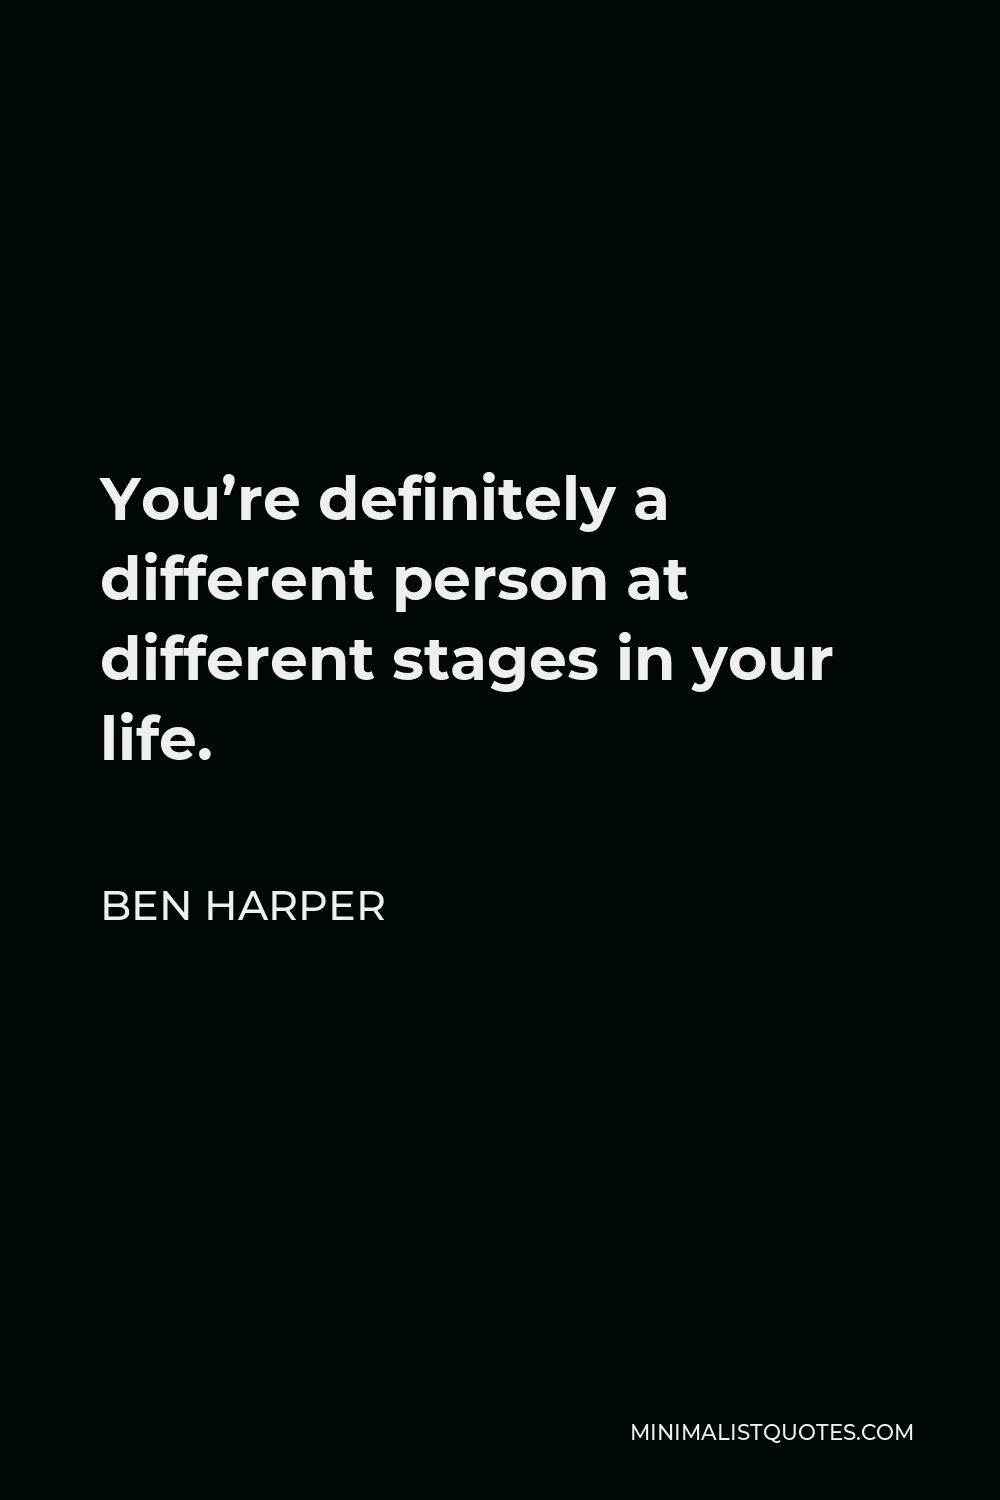 Ben Harper Quote - You’re definitely a different person at different stages in your life.